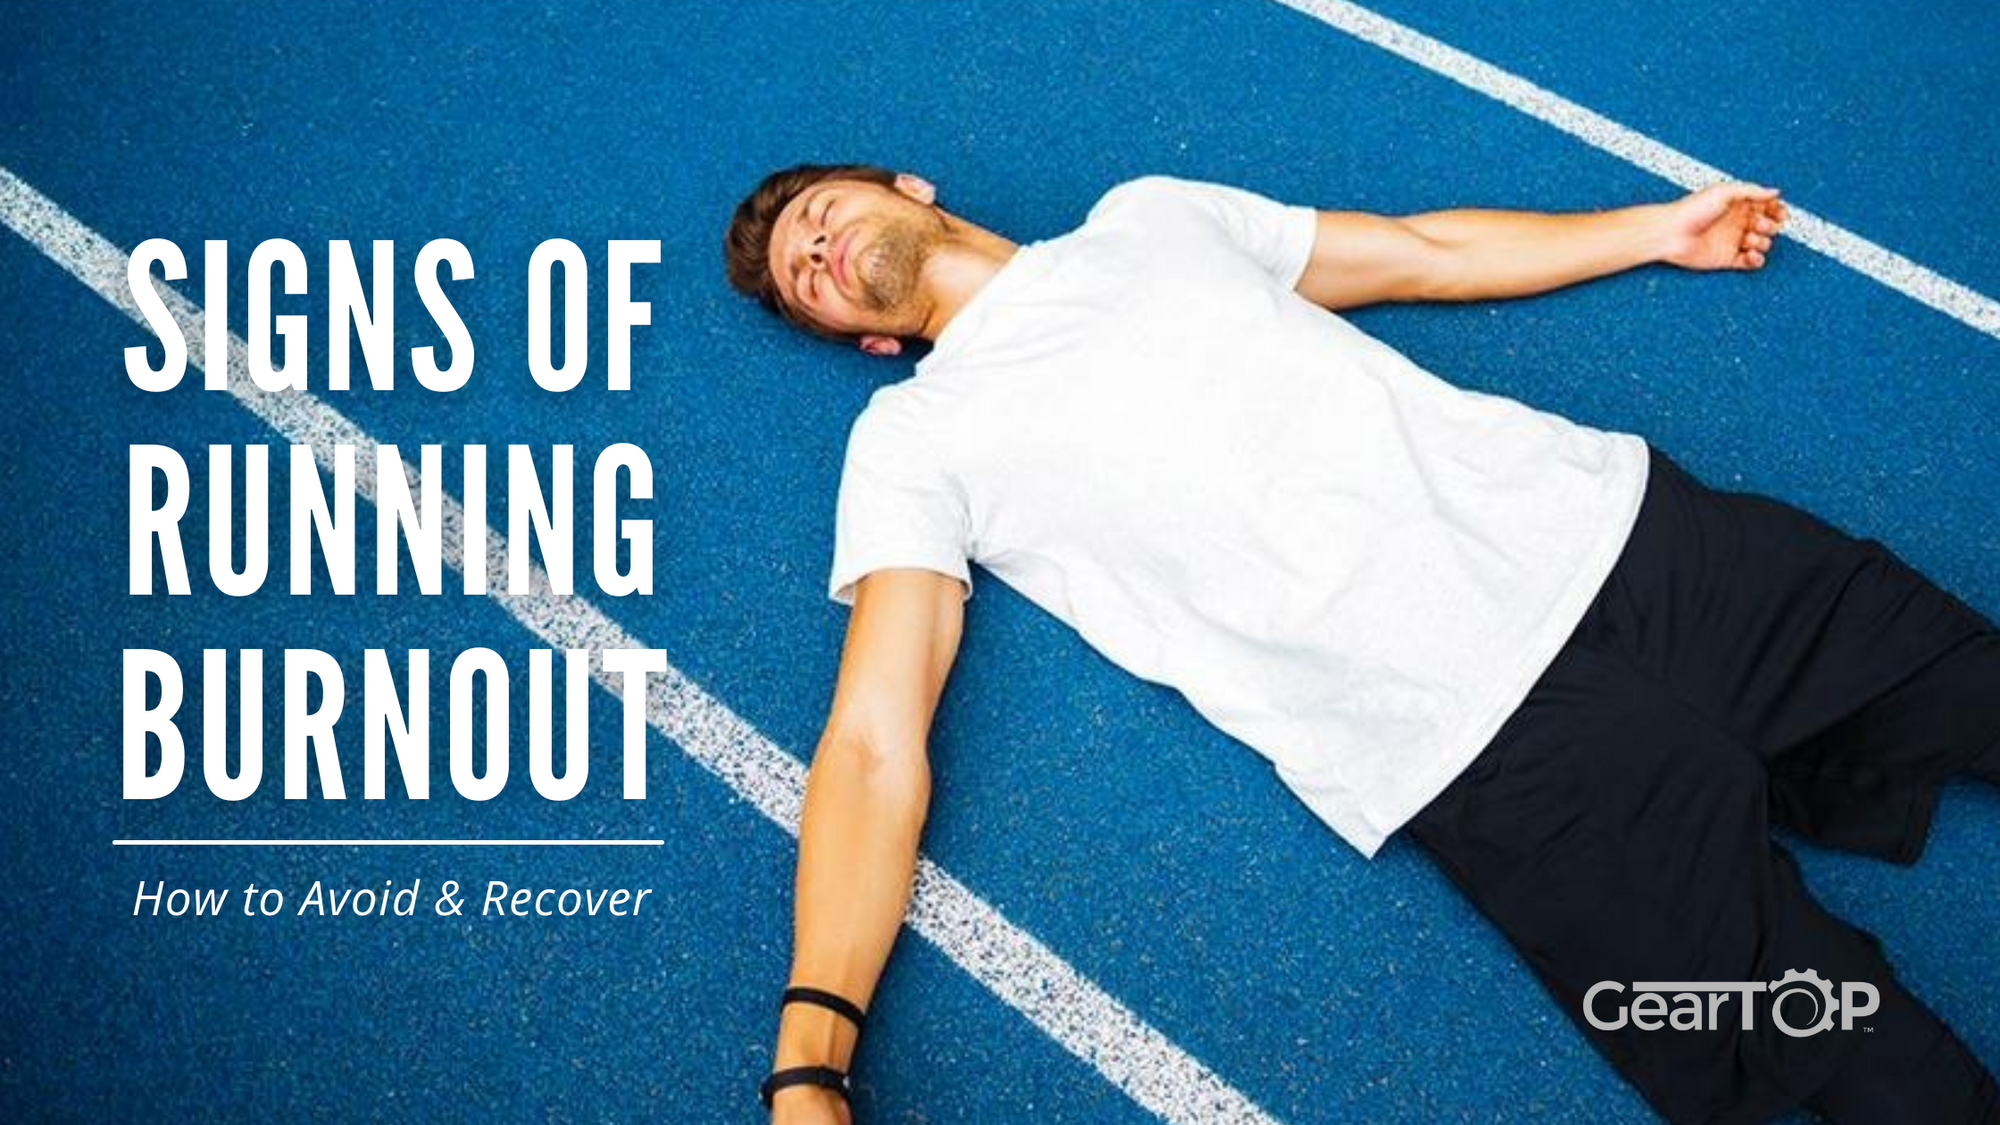 Signs of burnout from running